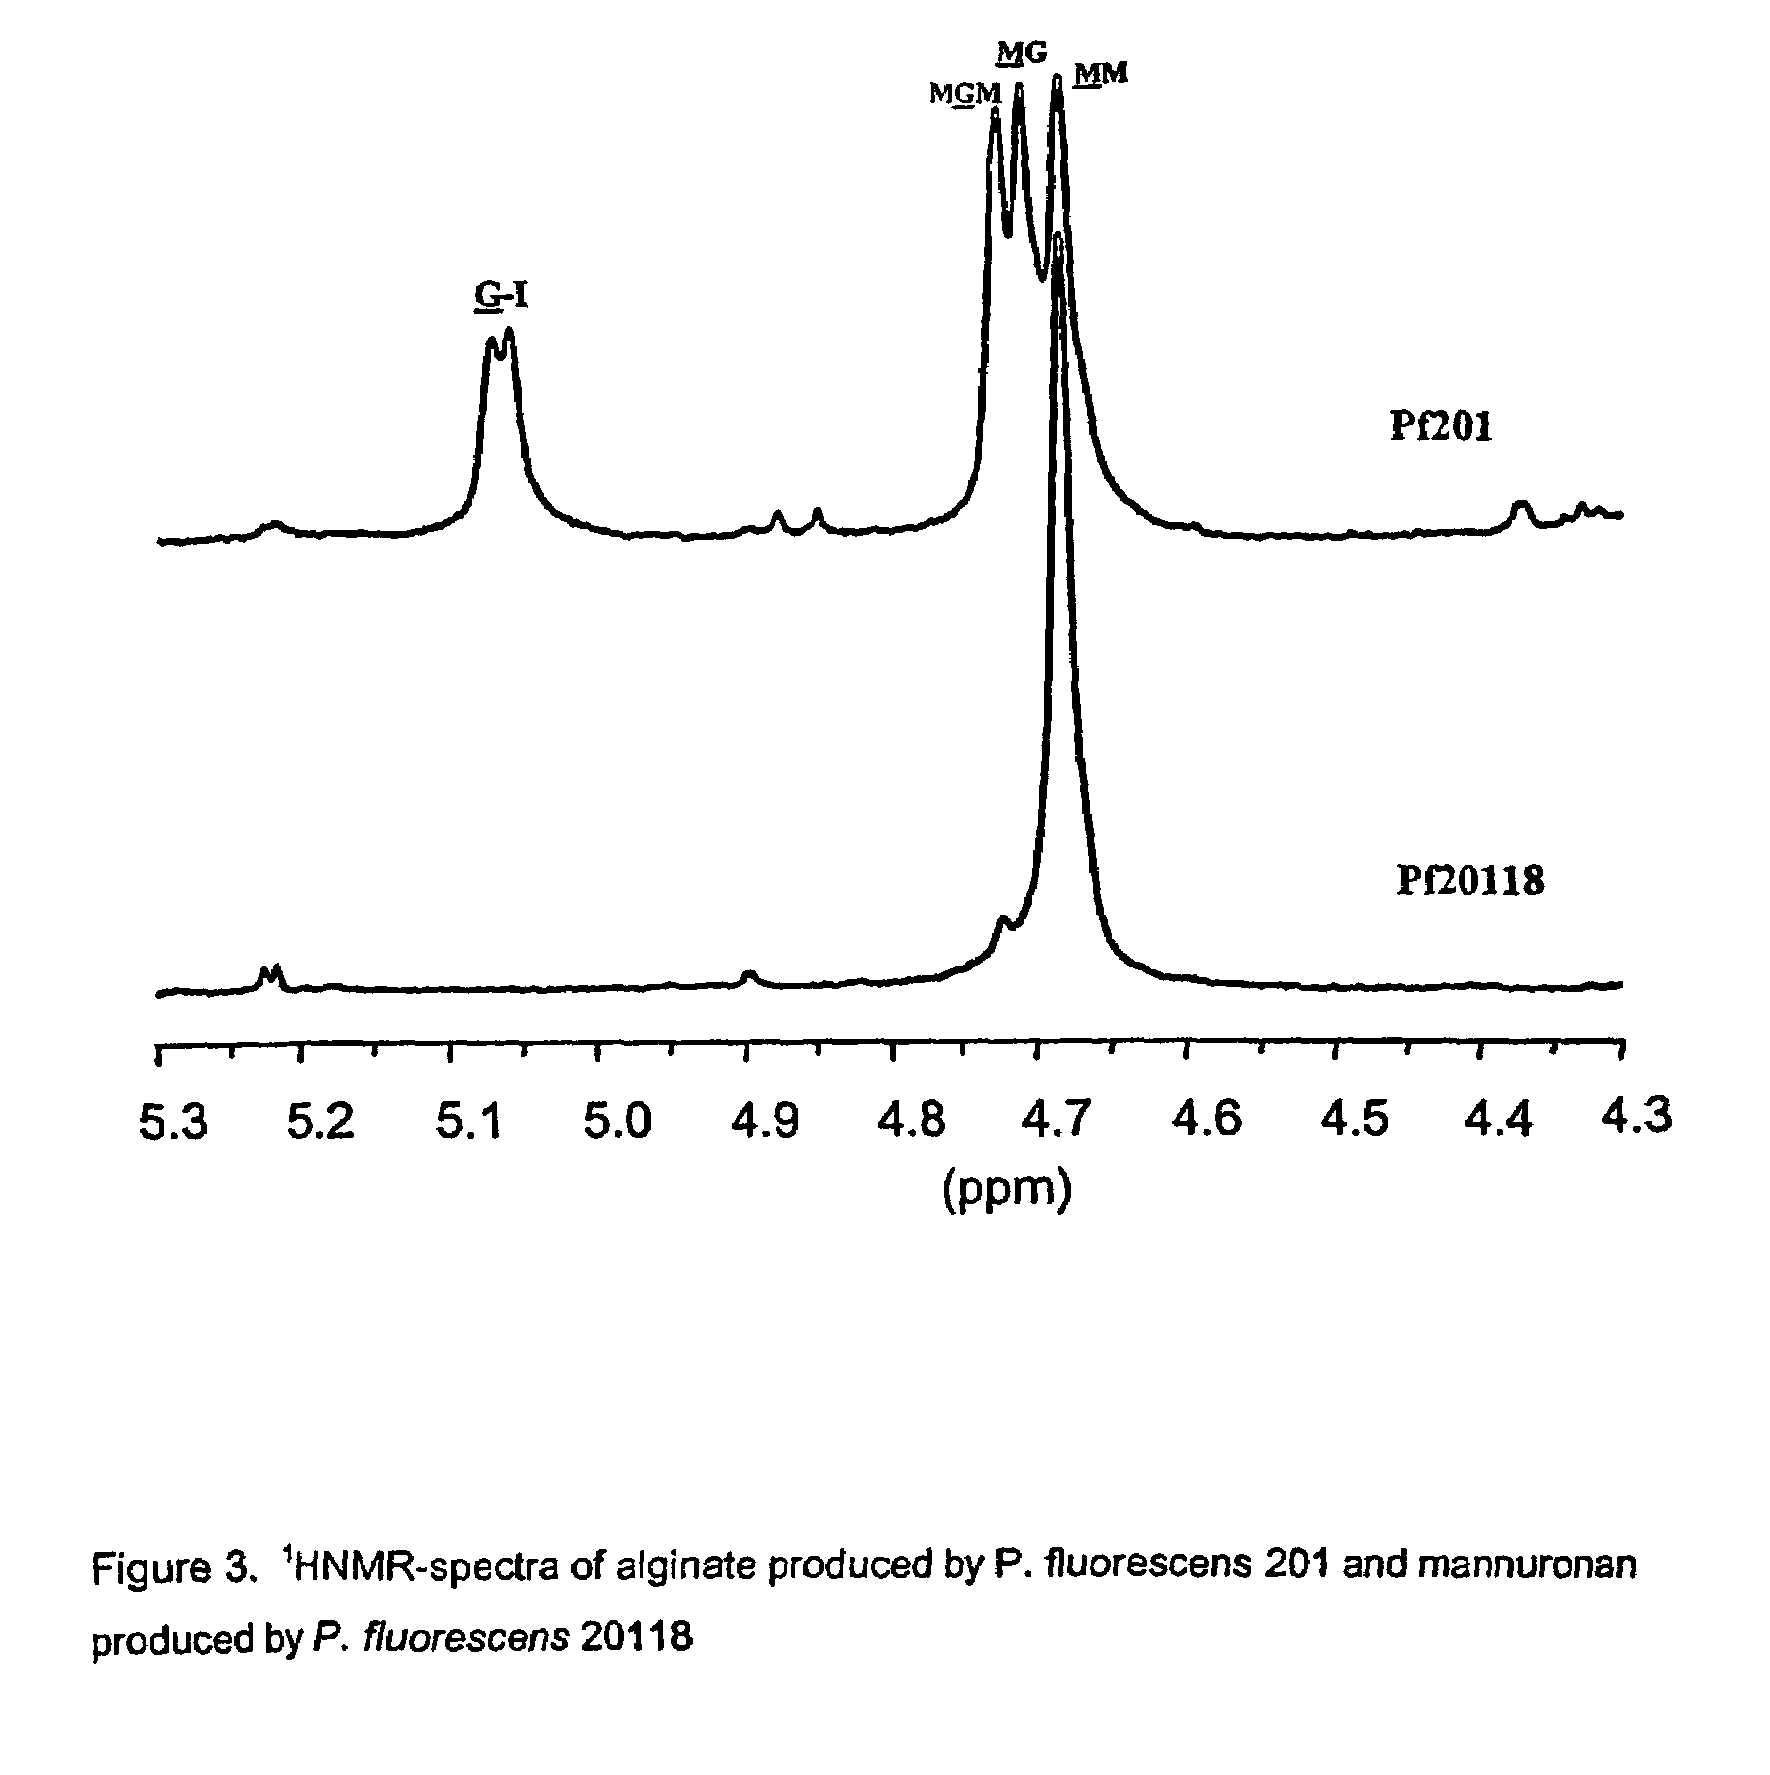 Mutant strains of Pseudomonas fluorescens and variants thereof, methods for their production, and uses thereof in alginate production